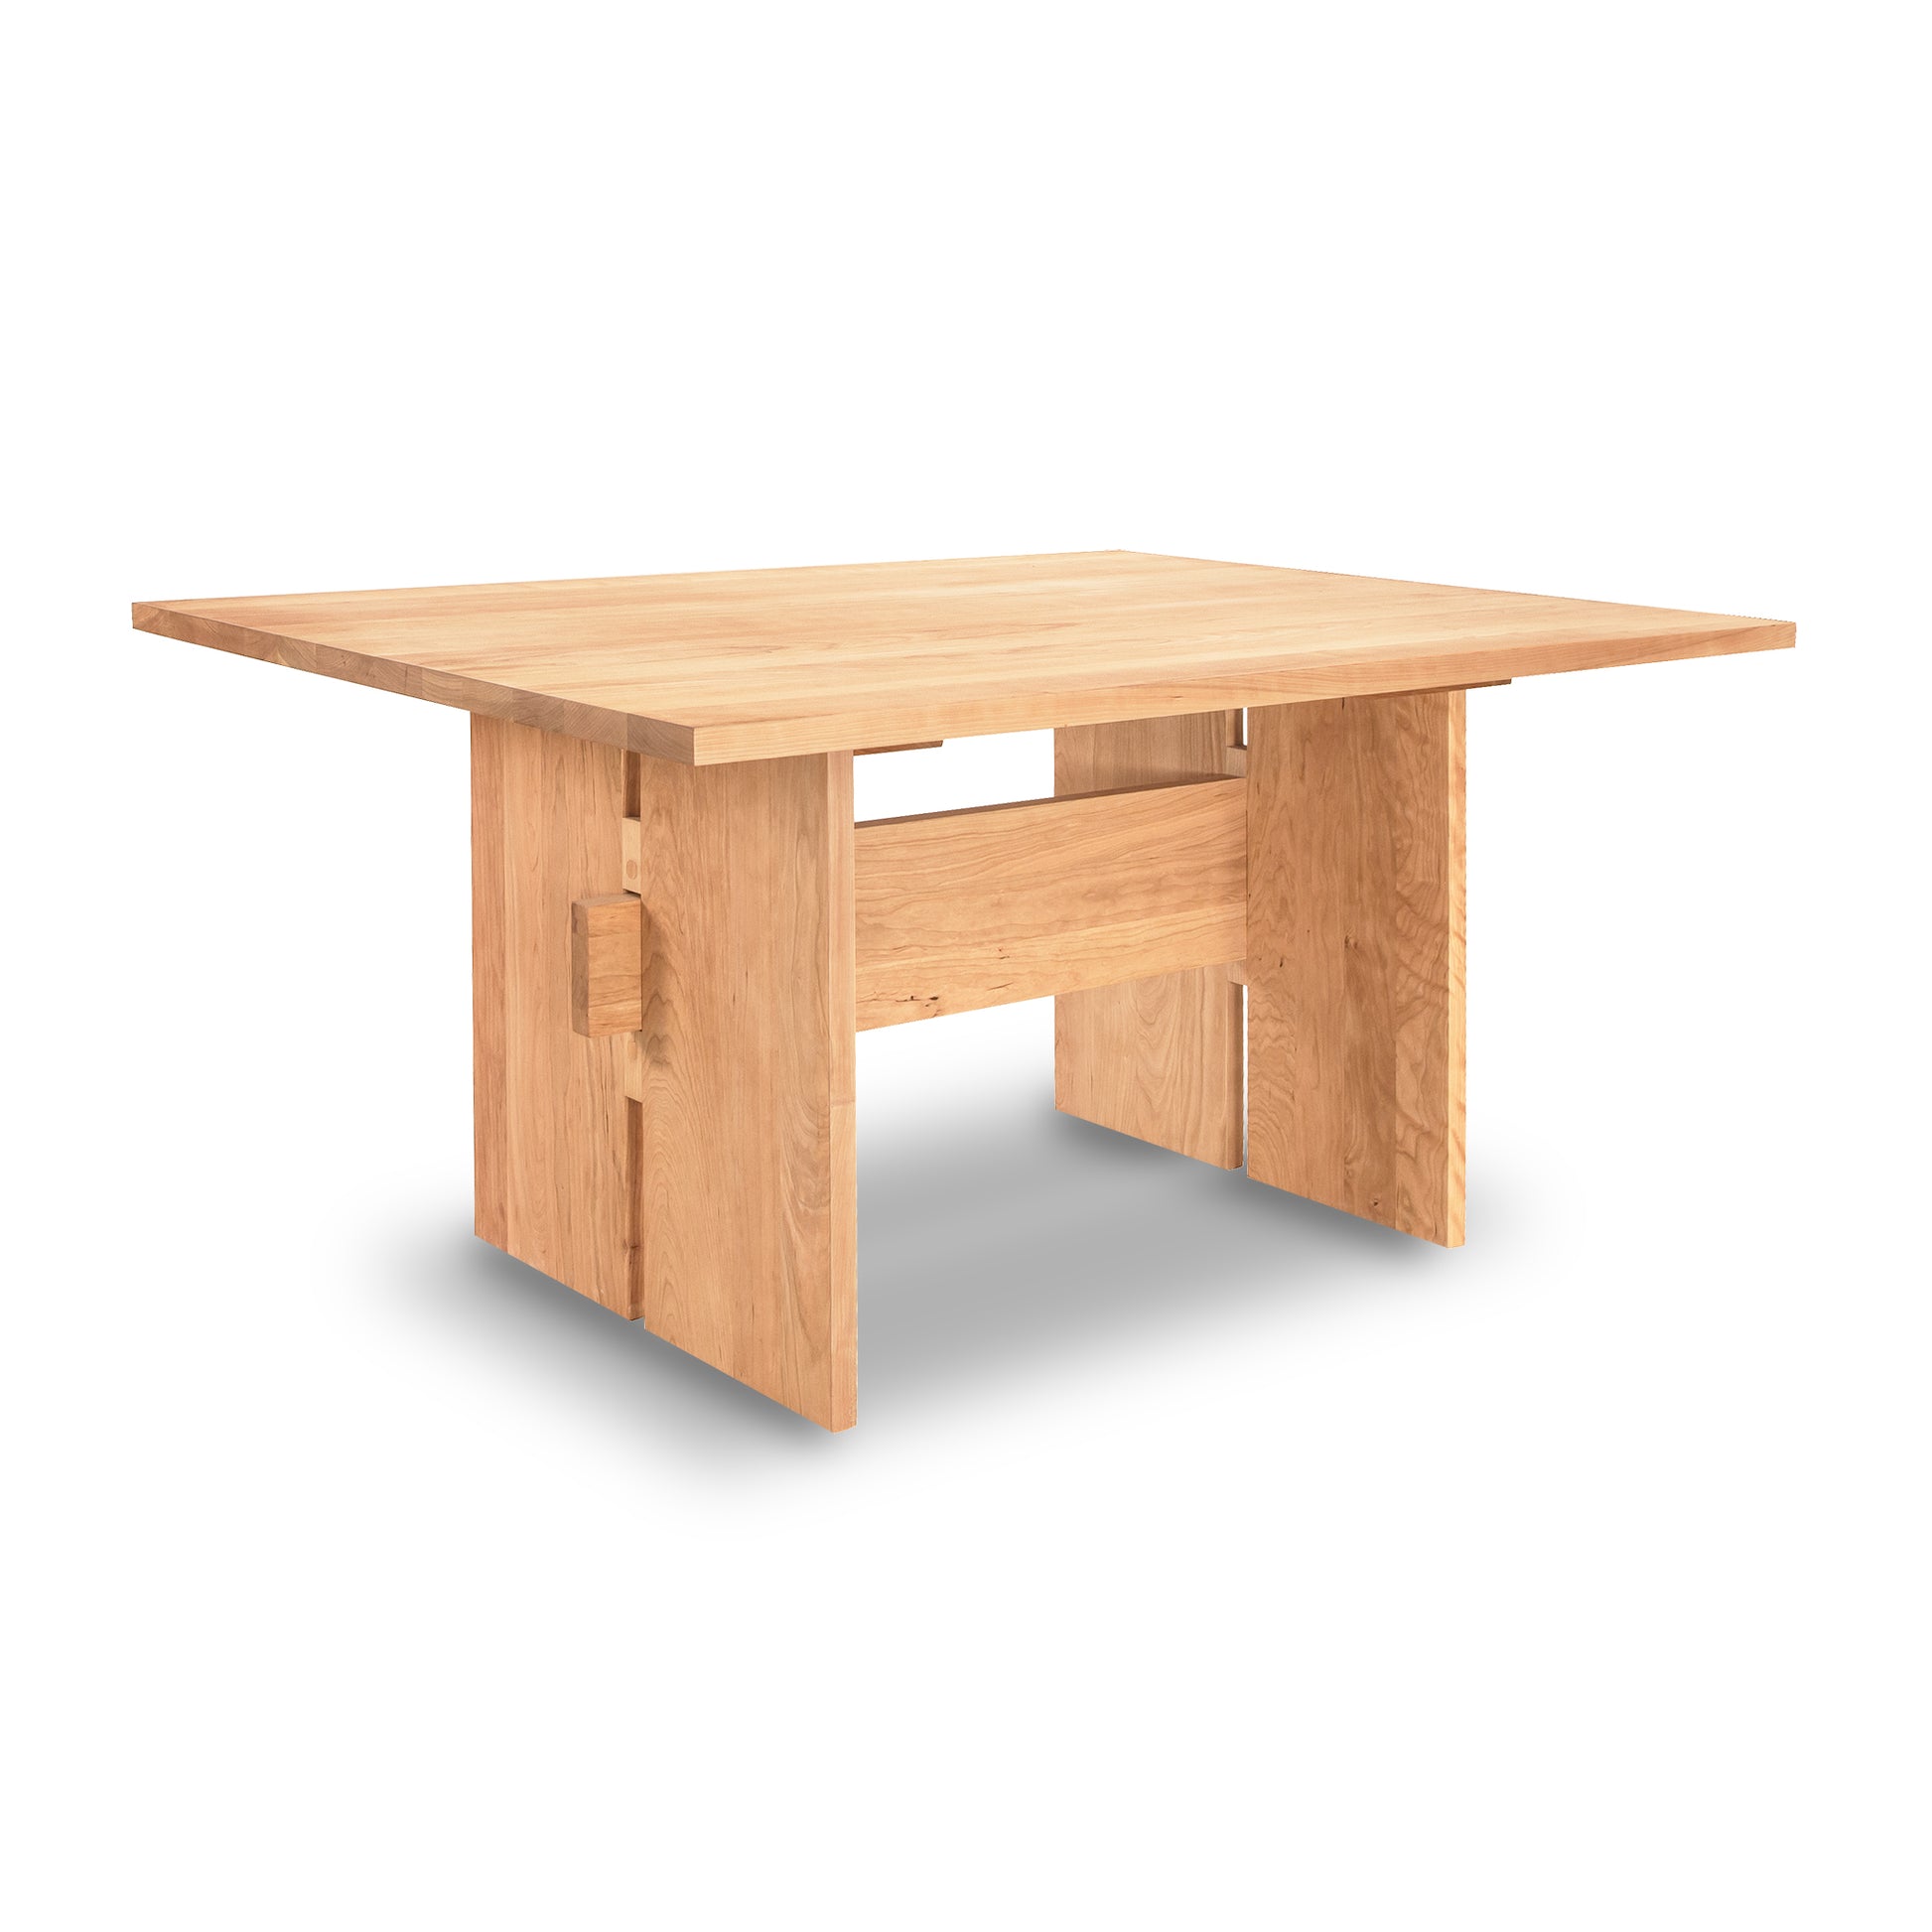 A high quality solid wood construction Modern American Dining Table with a square base from Vermont Furniture Designs.